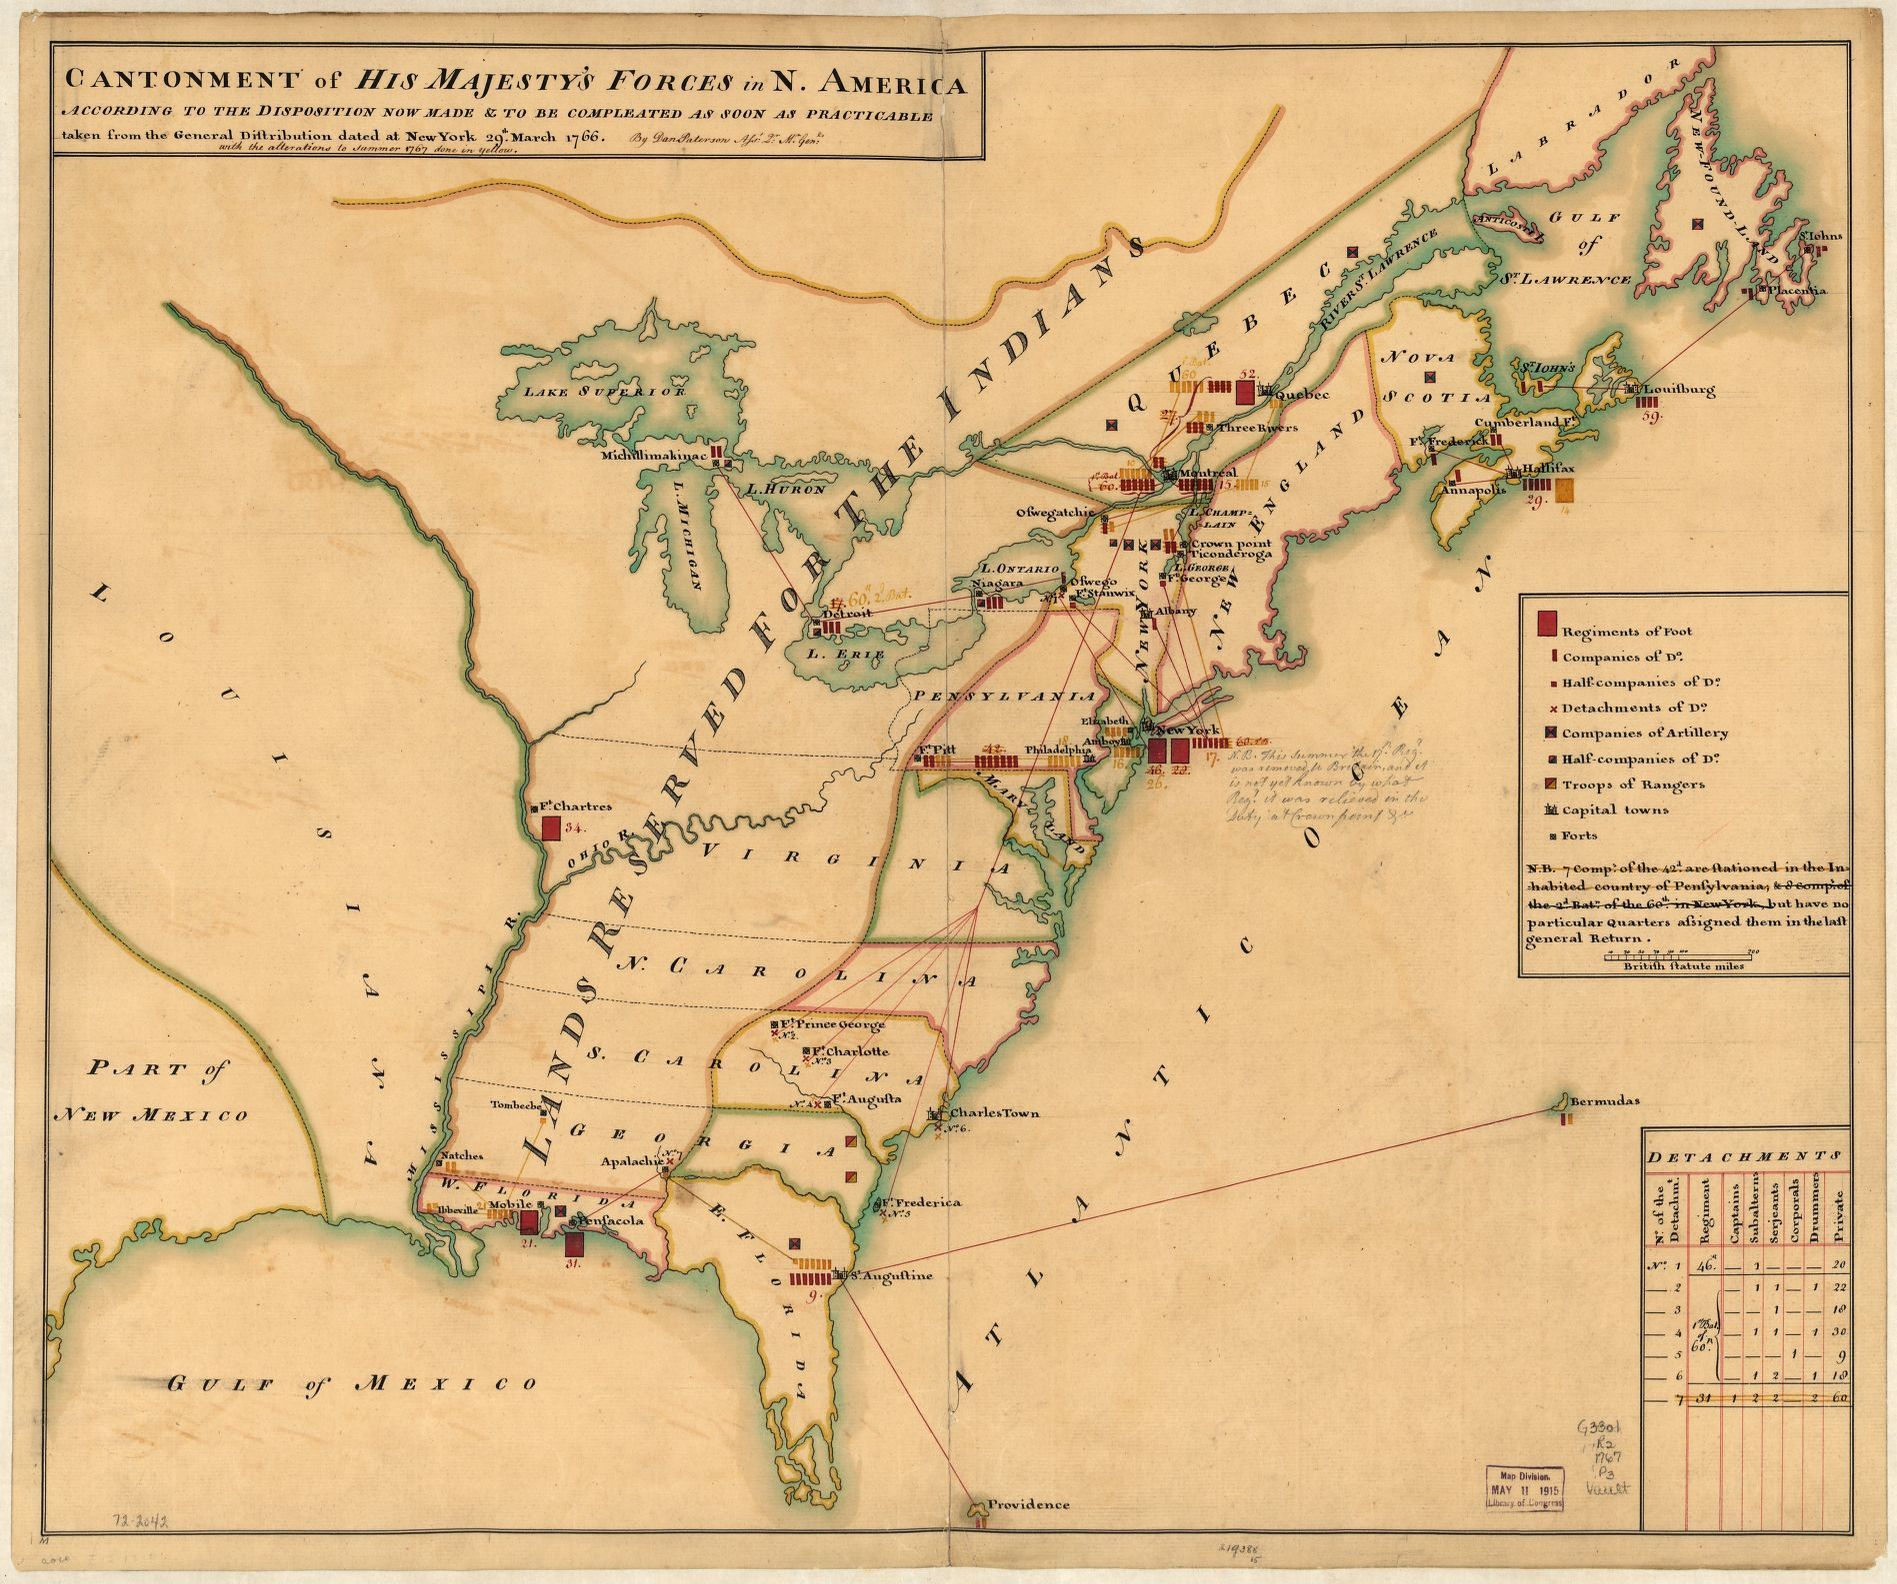 A 1767 map of the placement of British military forces in North America. Daniel Paterson, Cantonment of His Majesty's forces in N. America according to the disposition now made & to be completed as soon as practicable taken from the general distribution dated at New York, 29th. March, 1767 (Library of Congress)